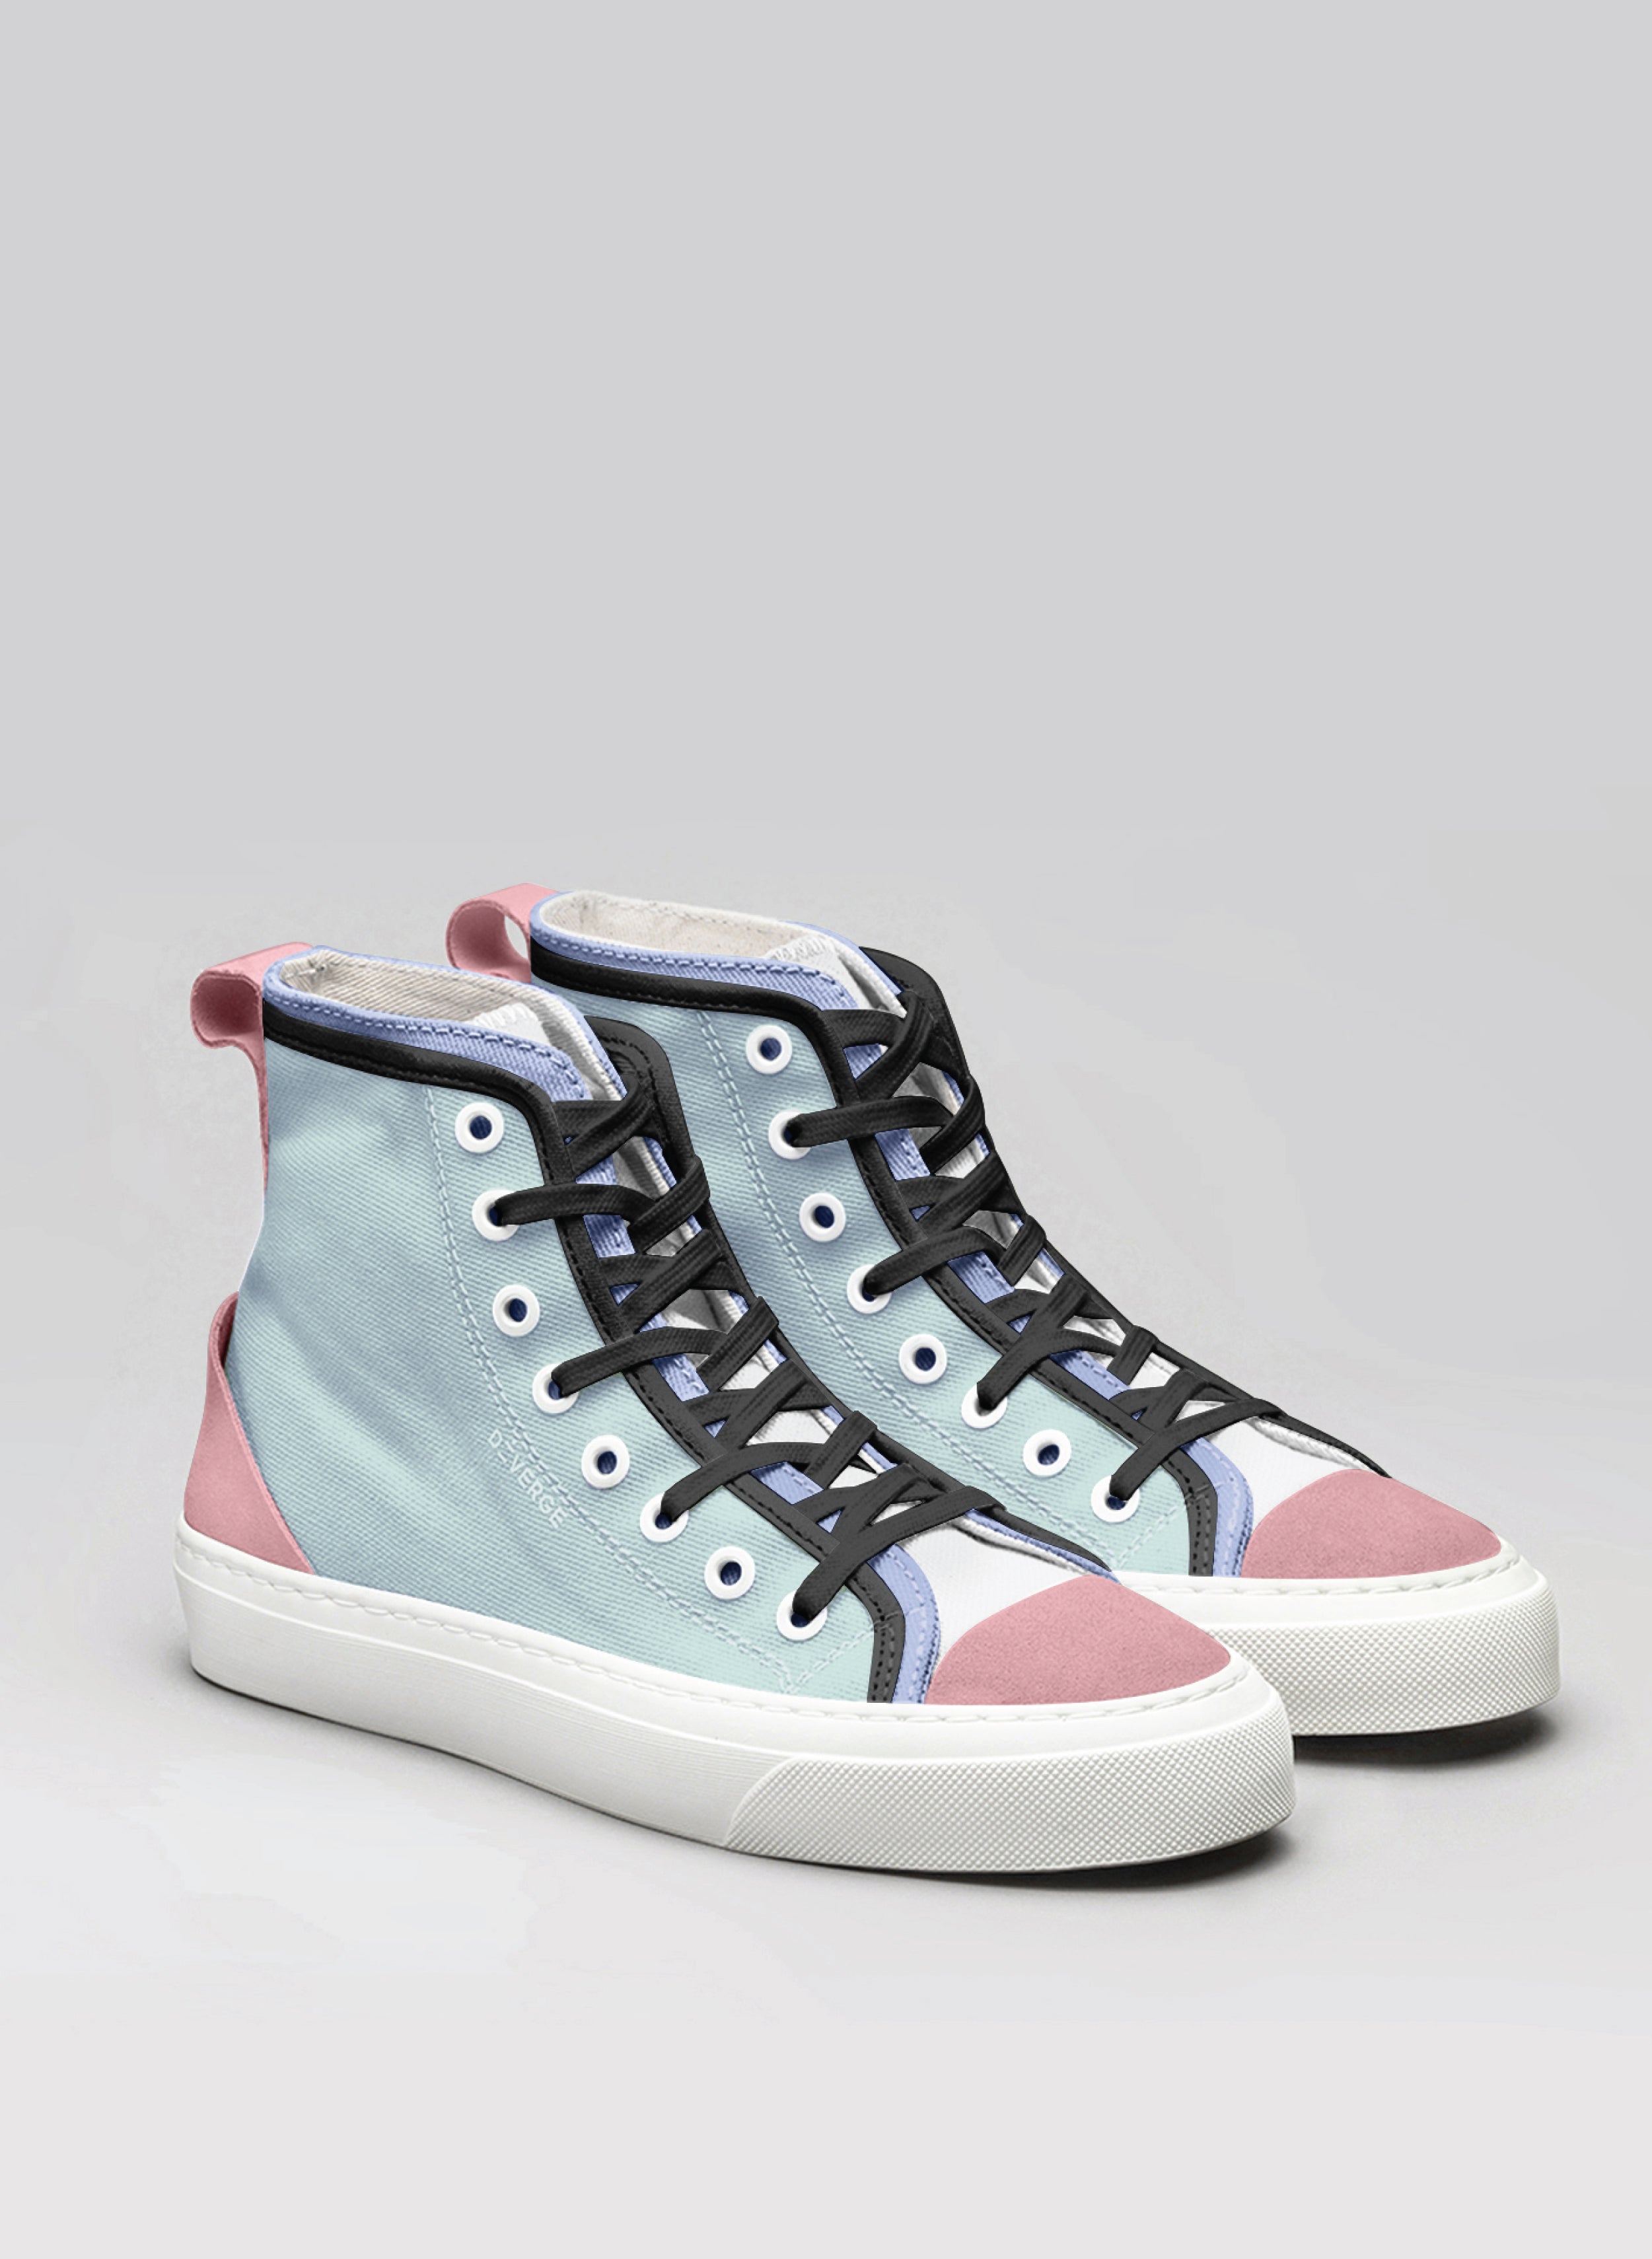 Blue and pink high top sneakers, designed by Diverge, showcasing social impact and custom style.